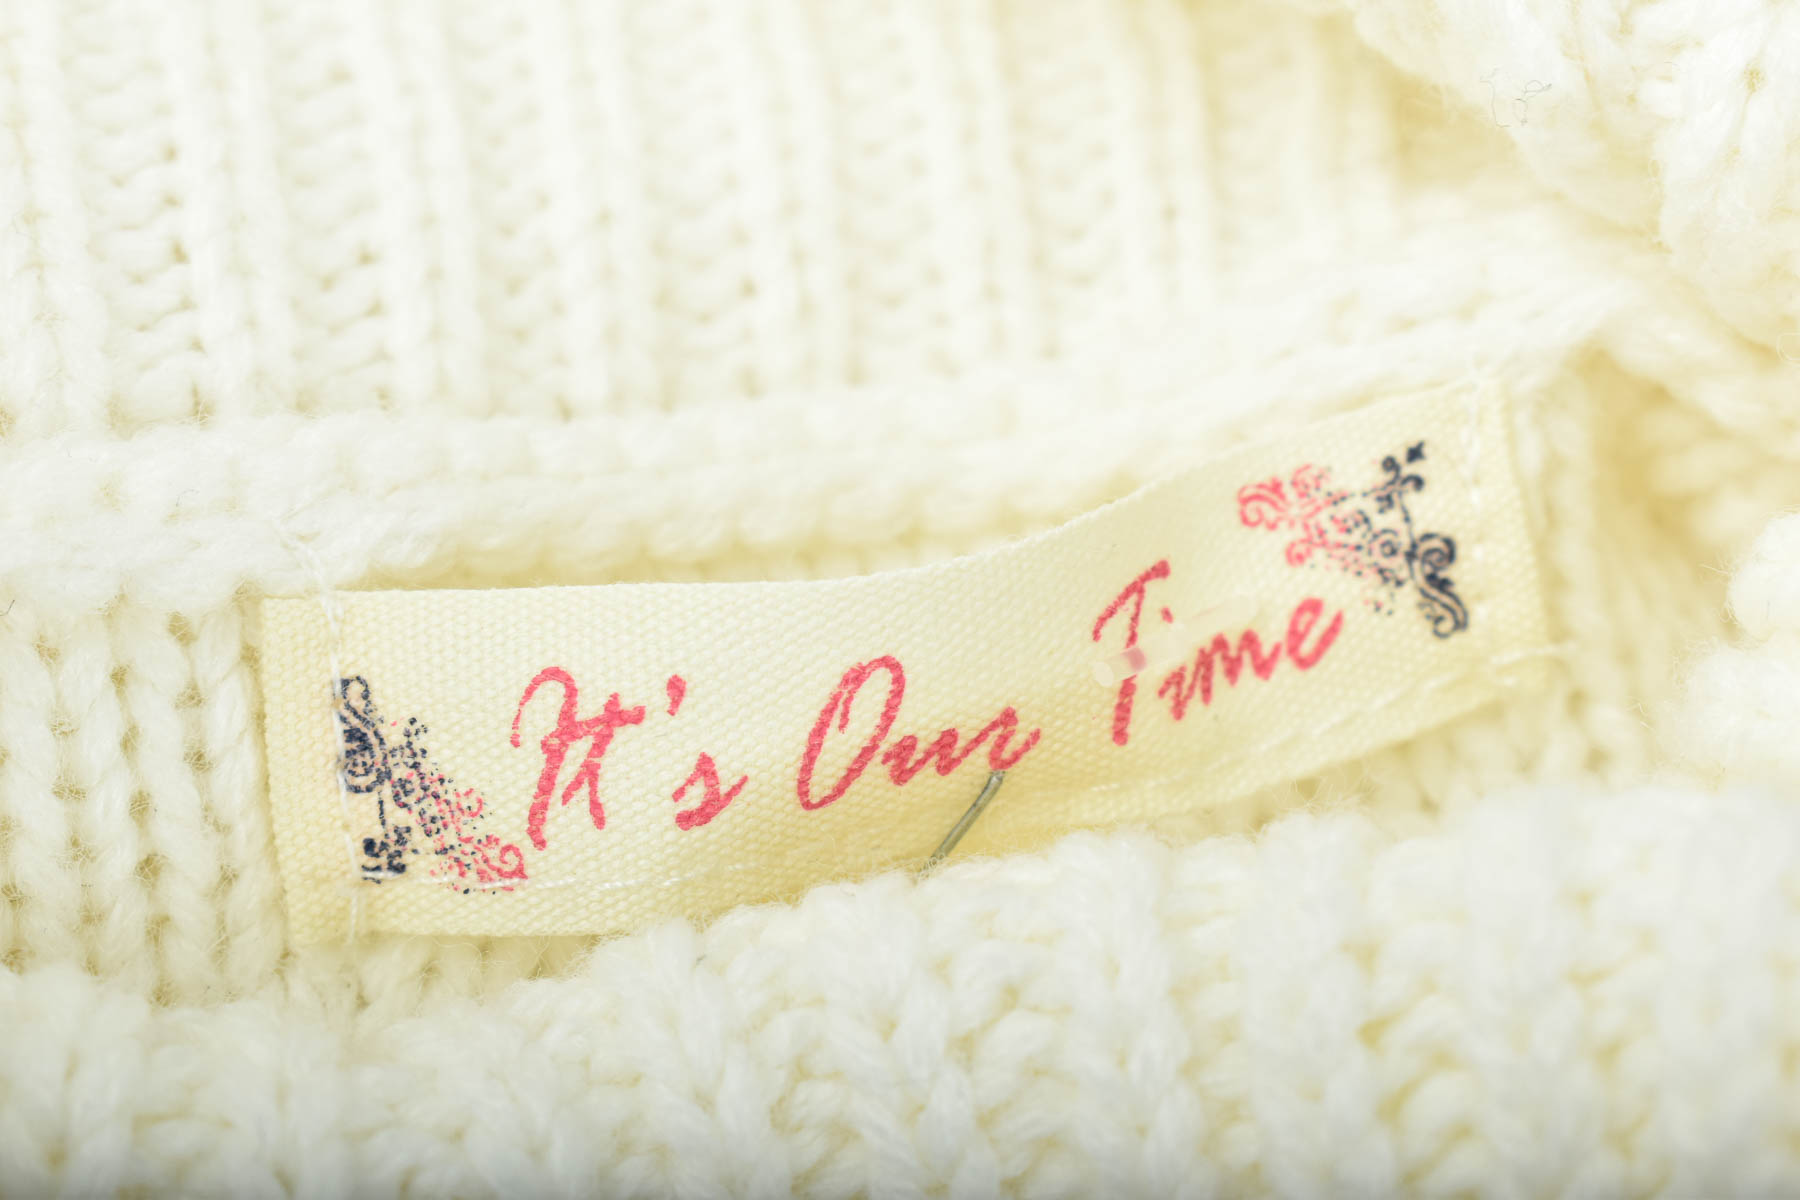 Women's sweater - It's our time - 2